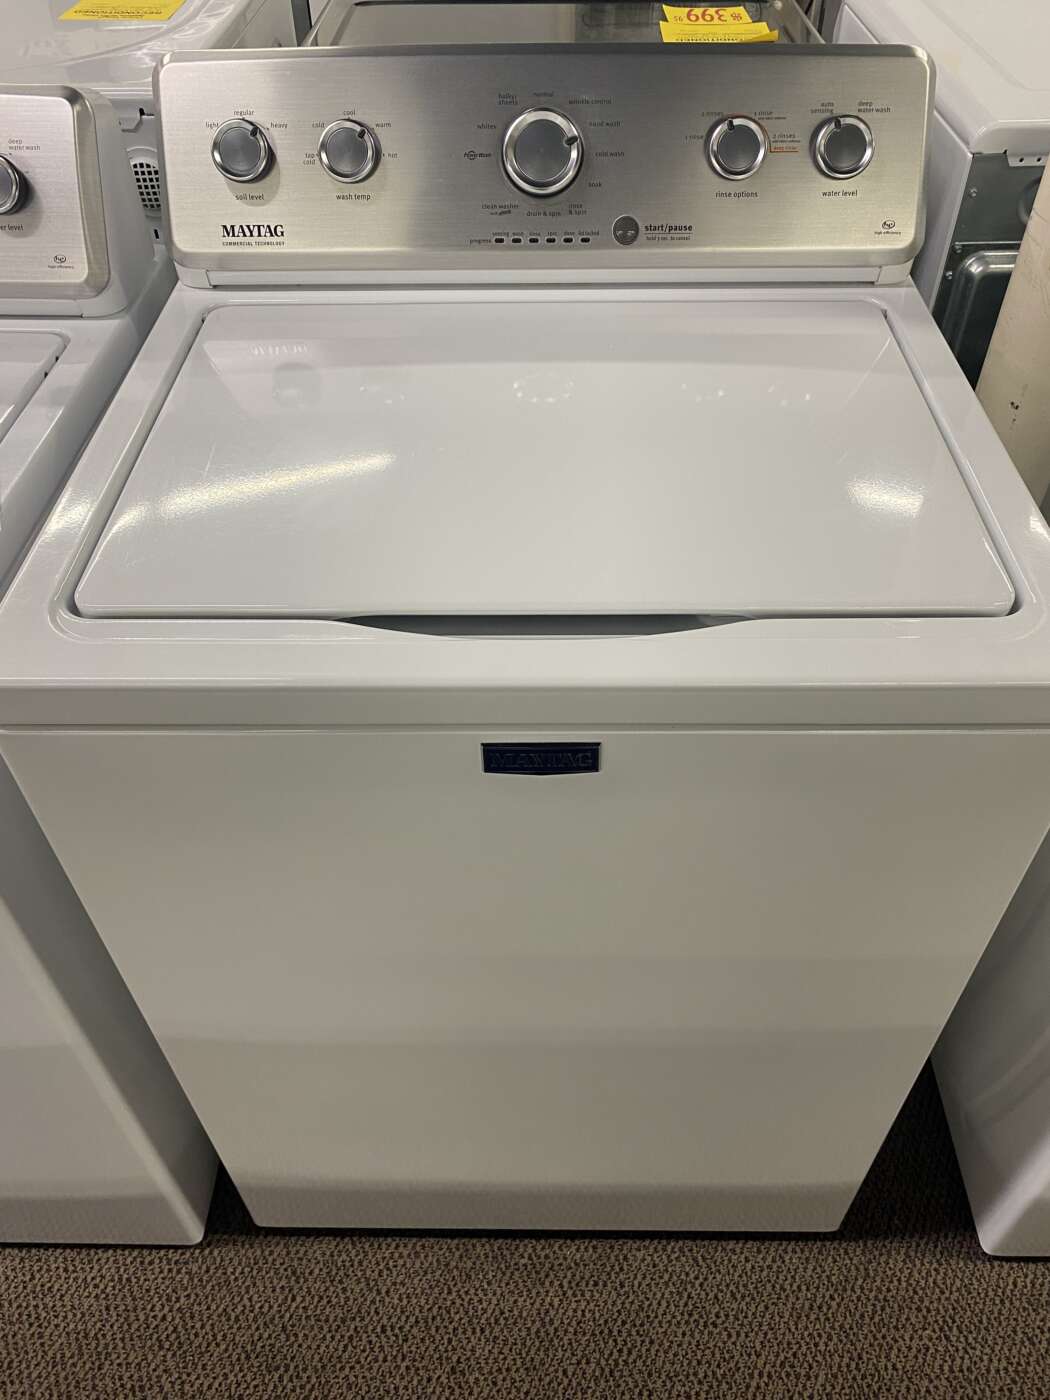 Reconditioned MAYTAG 3.6 Cu. Ft. Top-Load